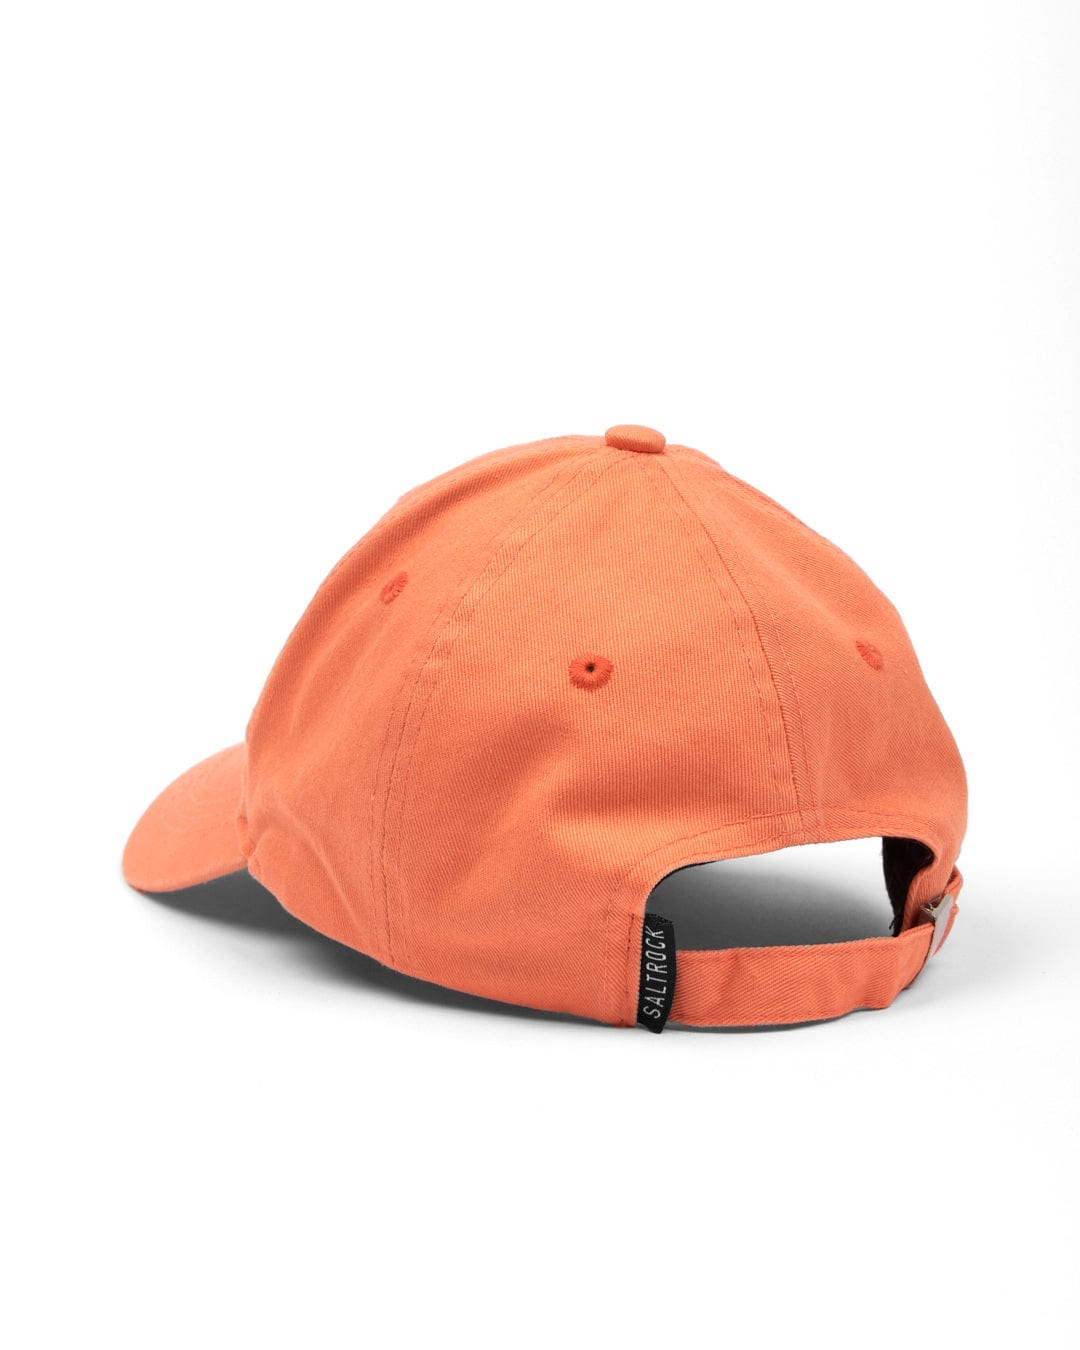 Saltrock Orange Cold Water Club baseball cap with a curved visor and adjustable strap against a white background.